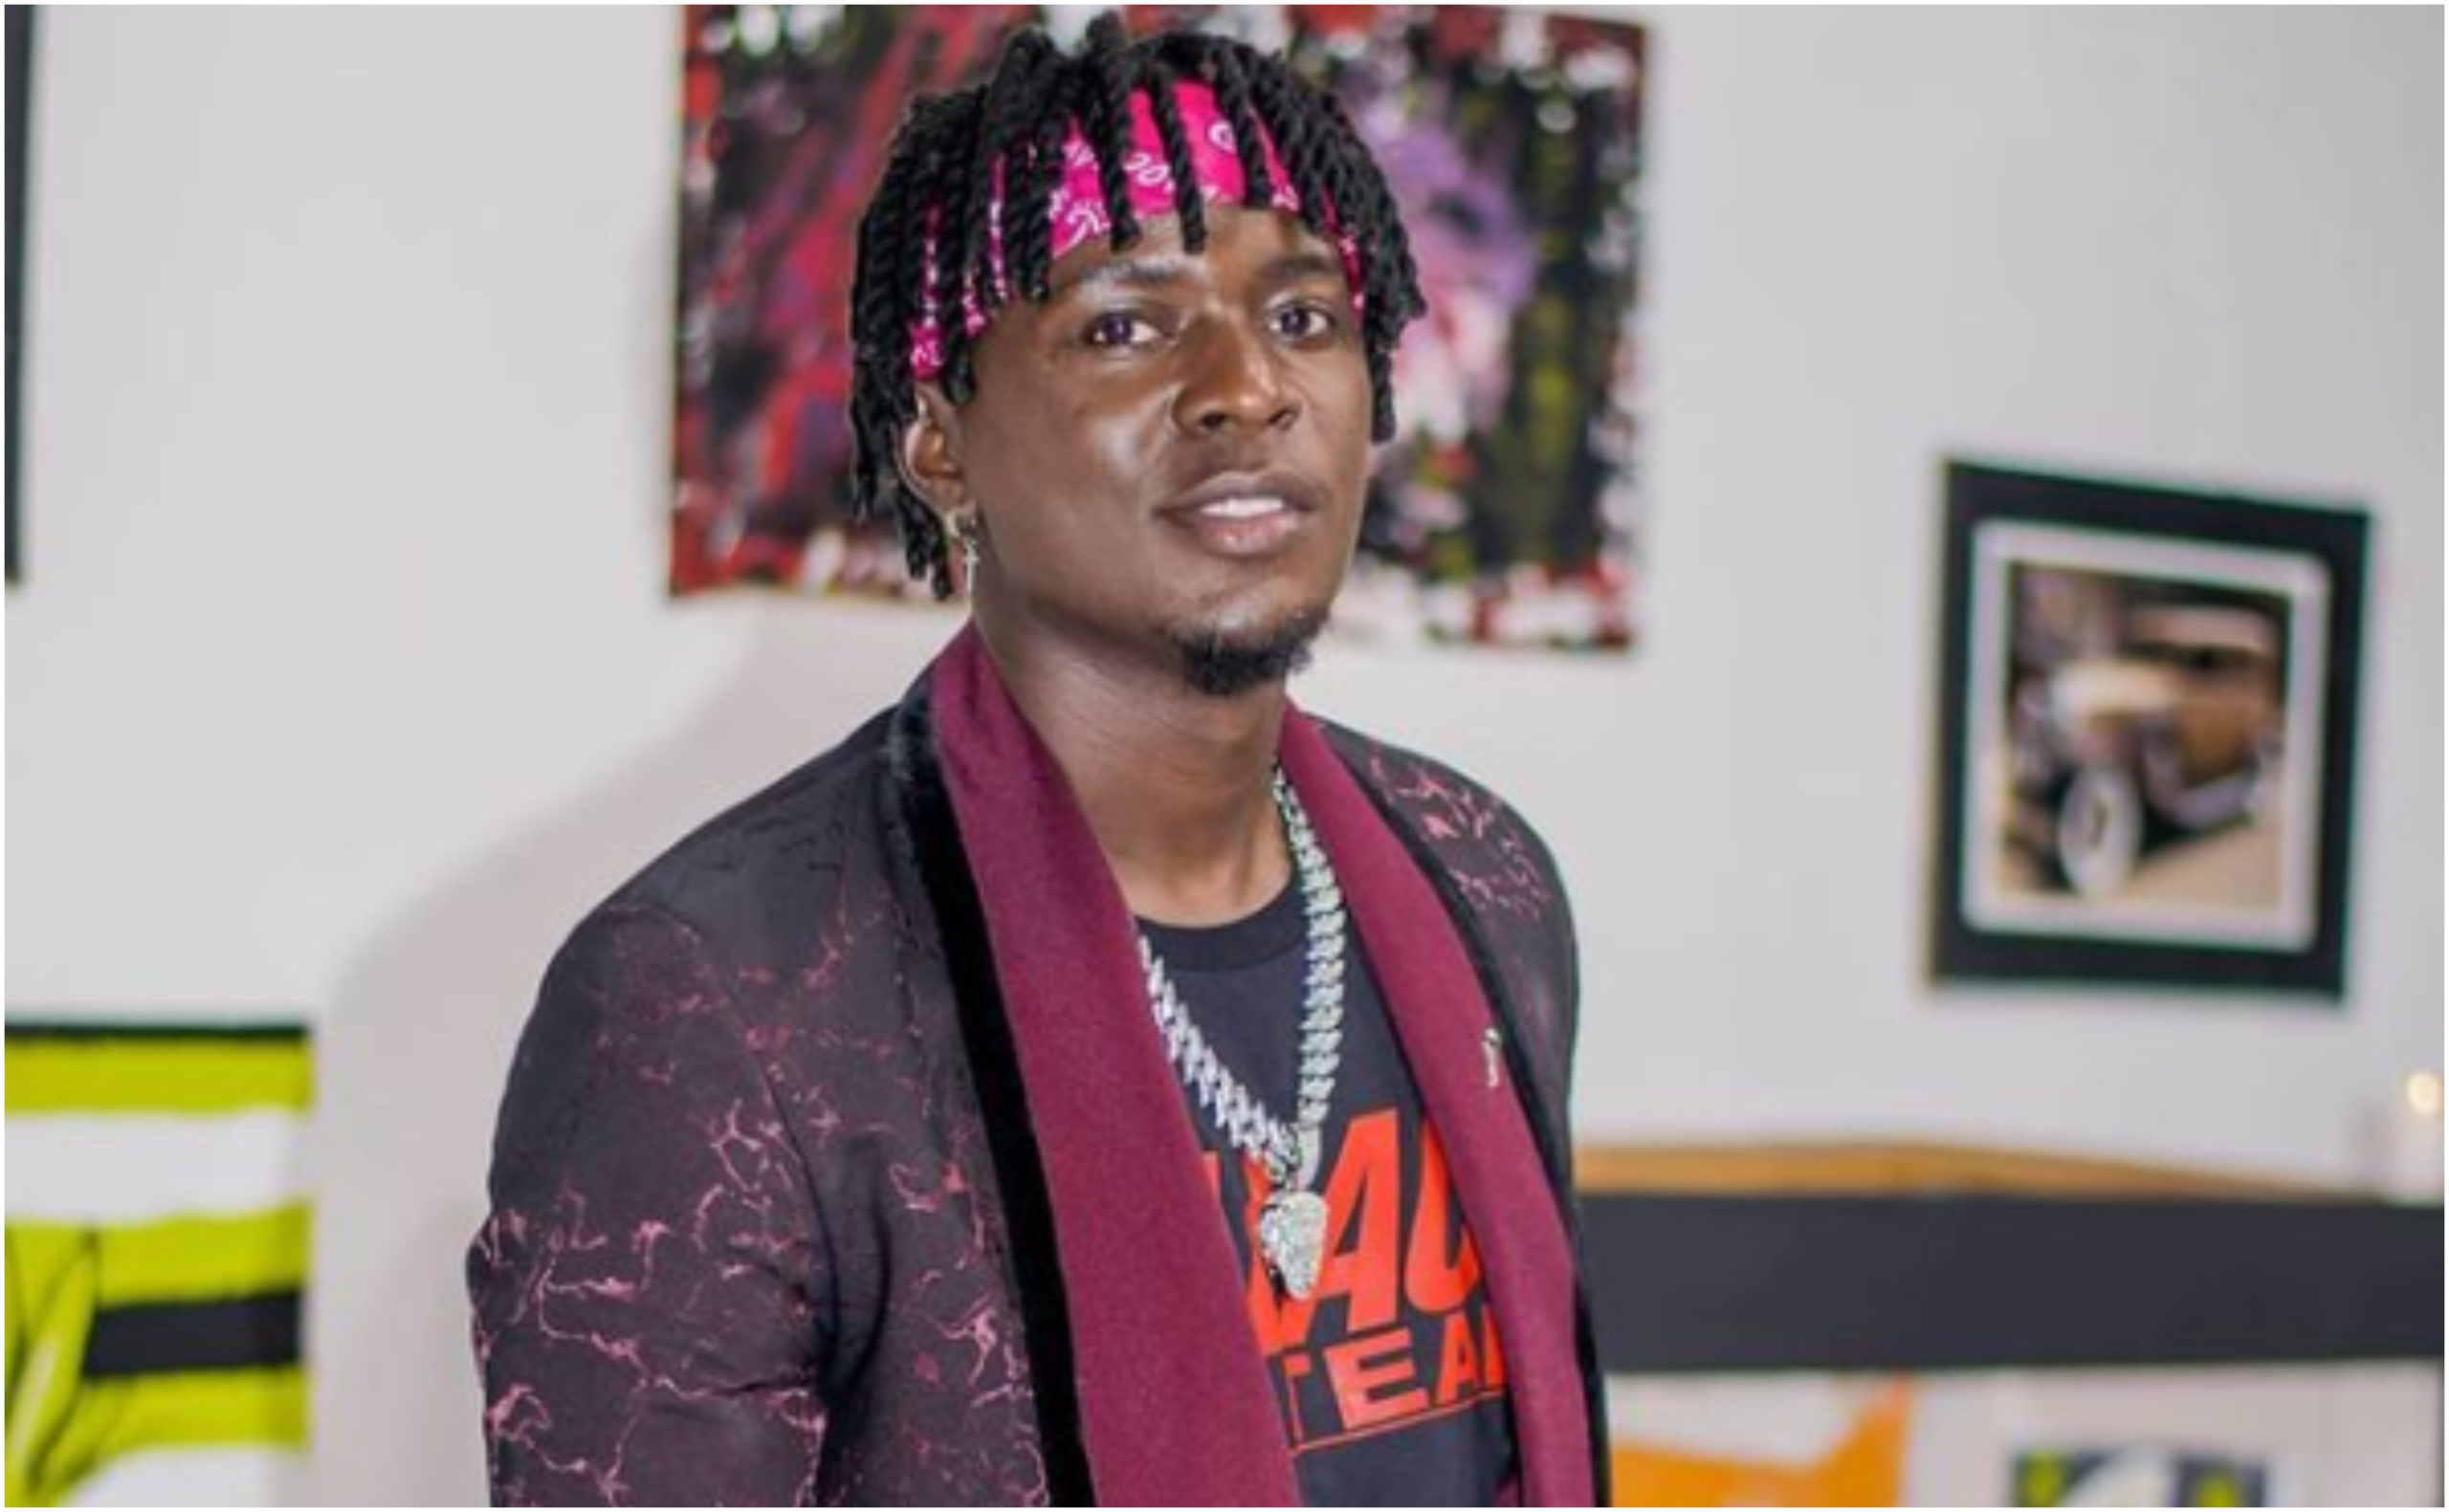 At some point Willy Paul needs to take responsibility of his baby making